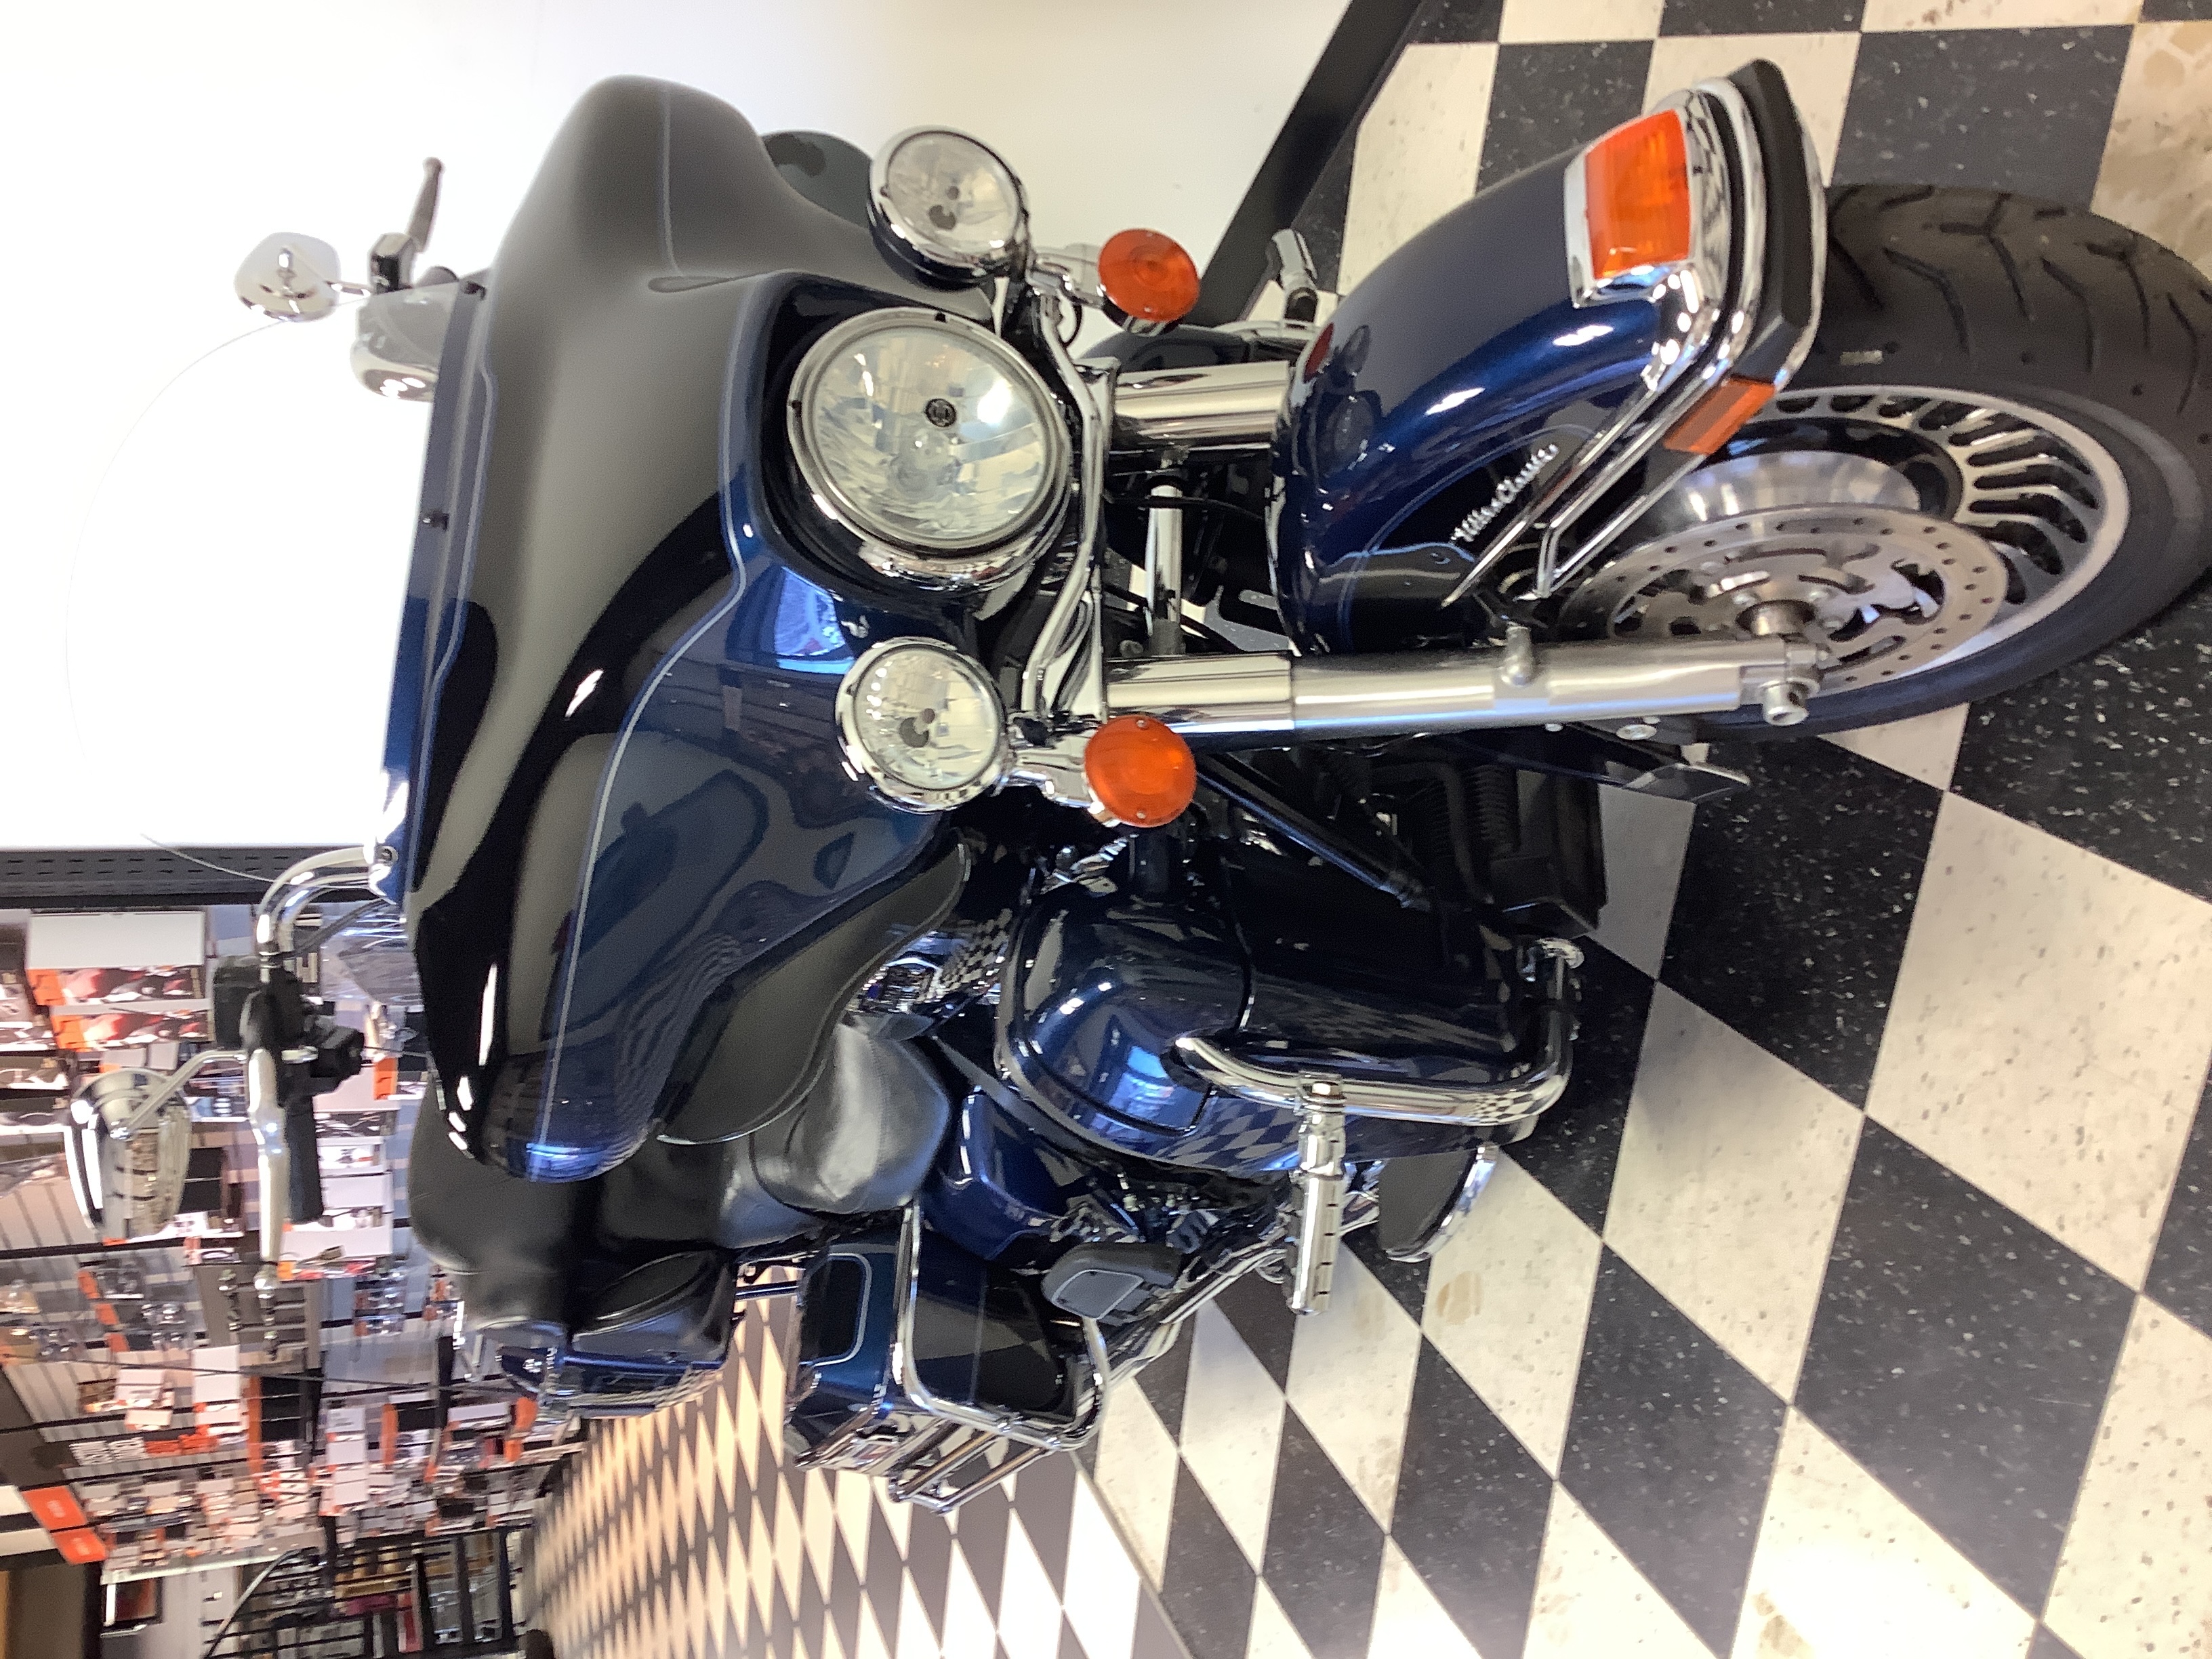 2013 Harley-Davidson Electra Glide Ultra Classic at Deluxe Harley Davidson